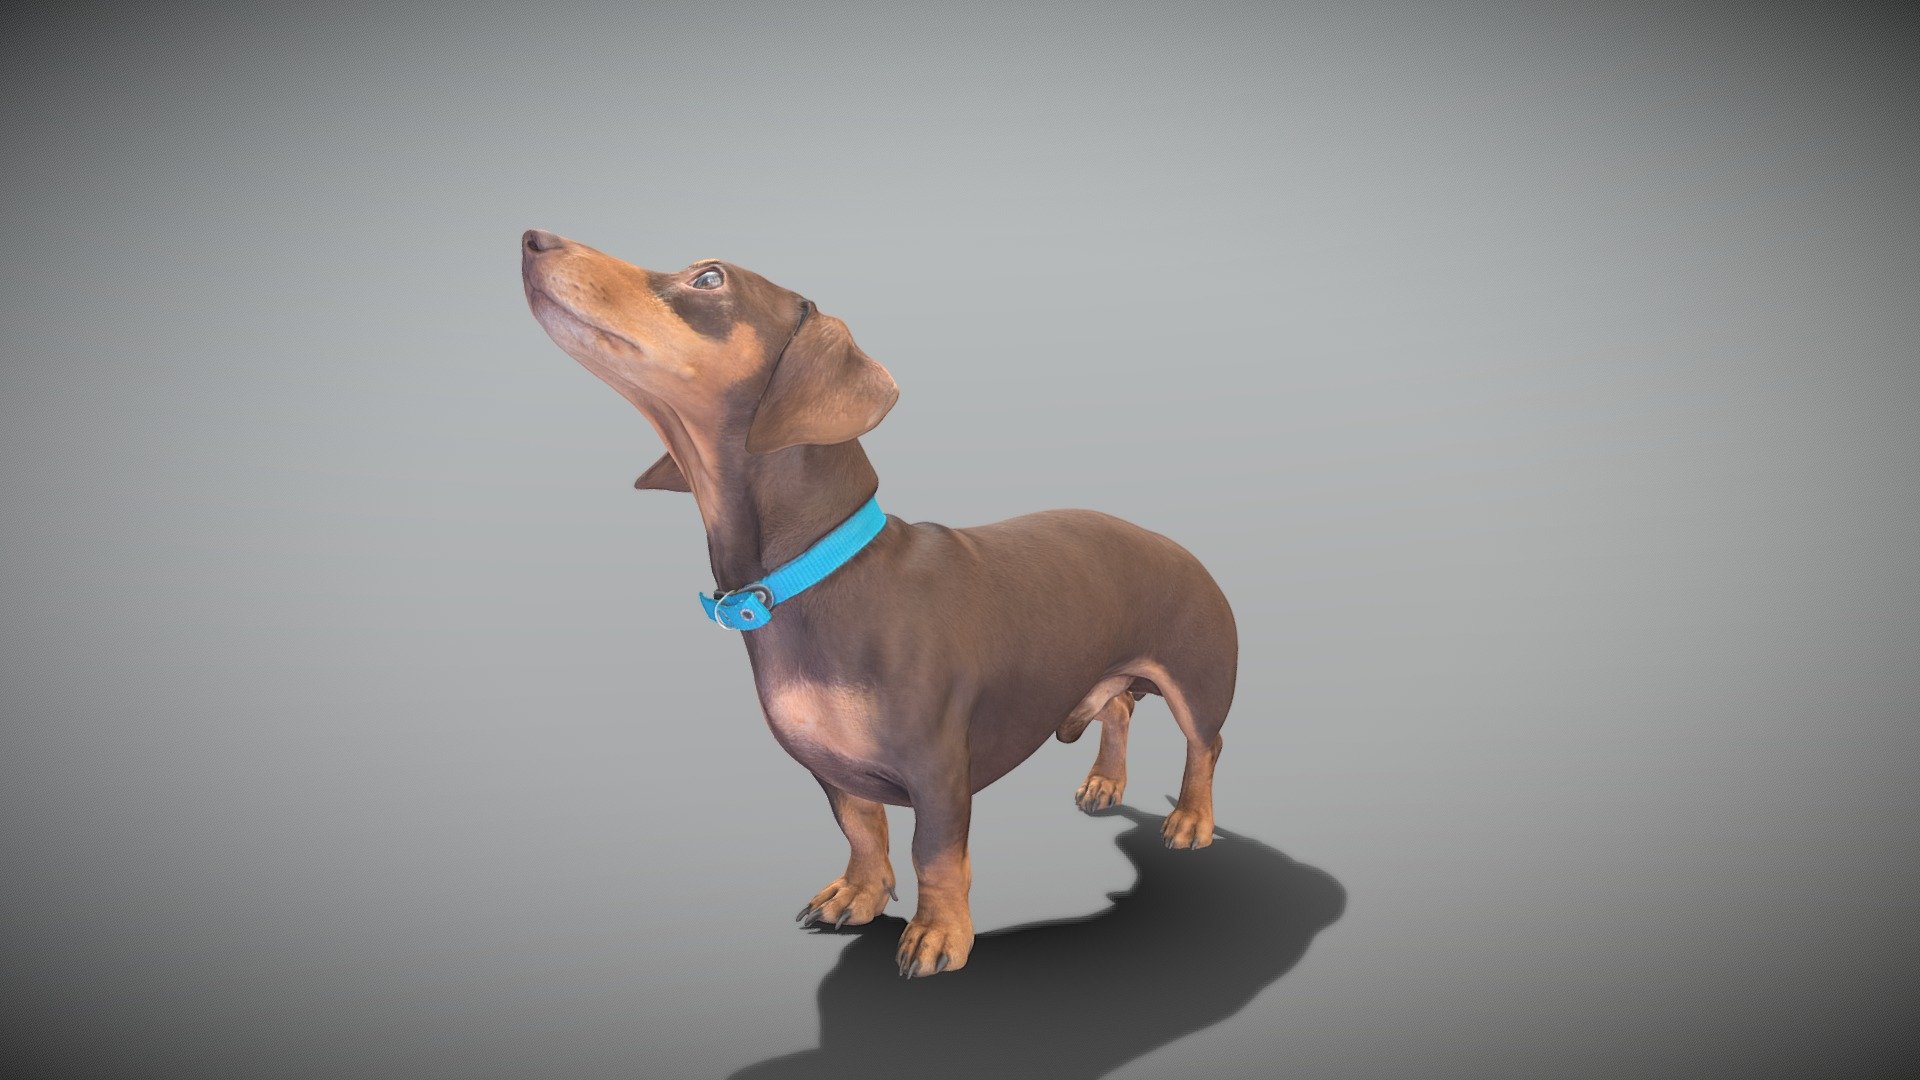 This is a true sized and highly detailed model of a young charming Dachshund dog. It will add life and coziness to any architectural visualisation of houses, playgrounds, parques, urban landscapes, etc. This model is suitable for game engine integration, VR/AR content, etc.

Technical specifications:




digital double 3d scan model

150k &amp; 30k triangles | double triangulated

high-poly model (.ztl tool with 5 subdivisions) clean and retopologized automatically via ZRemesher

sufficiently clean

PBR textures 8K resolution: Diffuse, Normal, Specular maps

non-overlapping UV map

no extra plugins are required for this model

Download package includes a Cinema 4D project file with Redshift shader, OBJ, FBX, STL files, which are applicable for 3ds Max, Maya, Unreal Engine, Unity, Blender, etc. All the textures you will find in the “Tex” folder, included into the main archive.

3D EVERYTHING

Stand with Ukraine! - Playful dachshund dog 35 - Buy Royalty Free 3D model by deep3dstudio 3d model